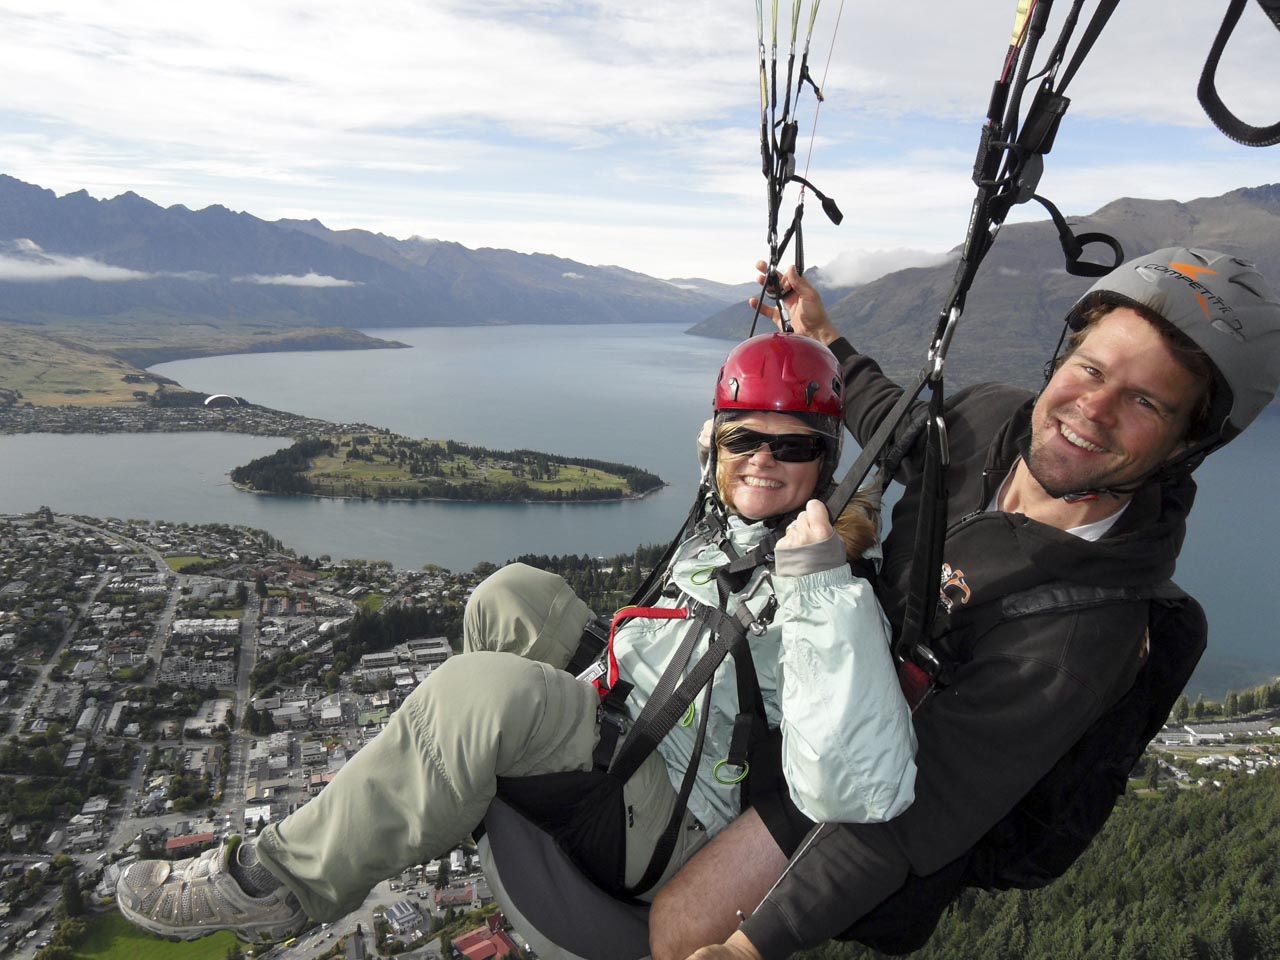 Deb ended her anxiety in Queenstown New Zealand